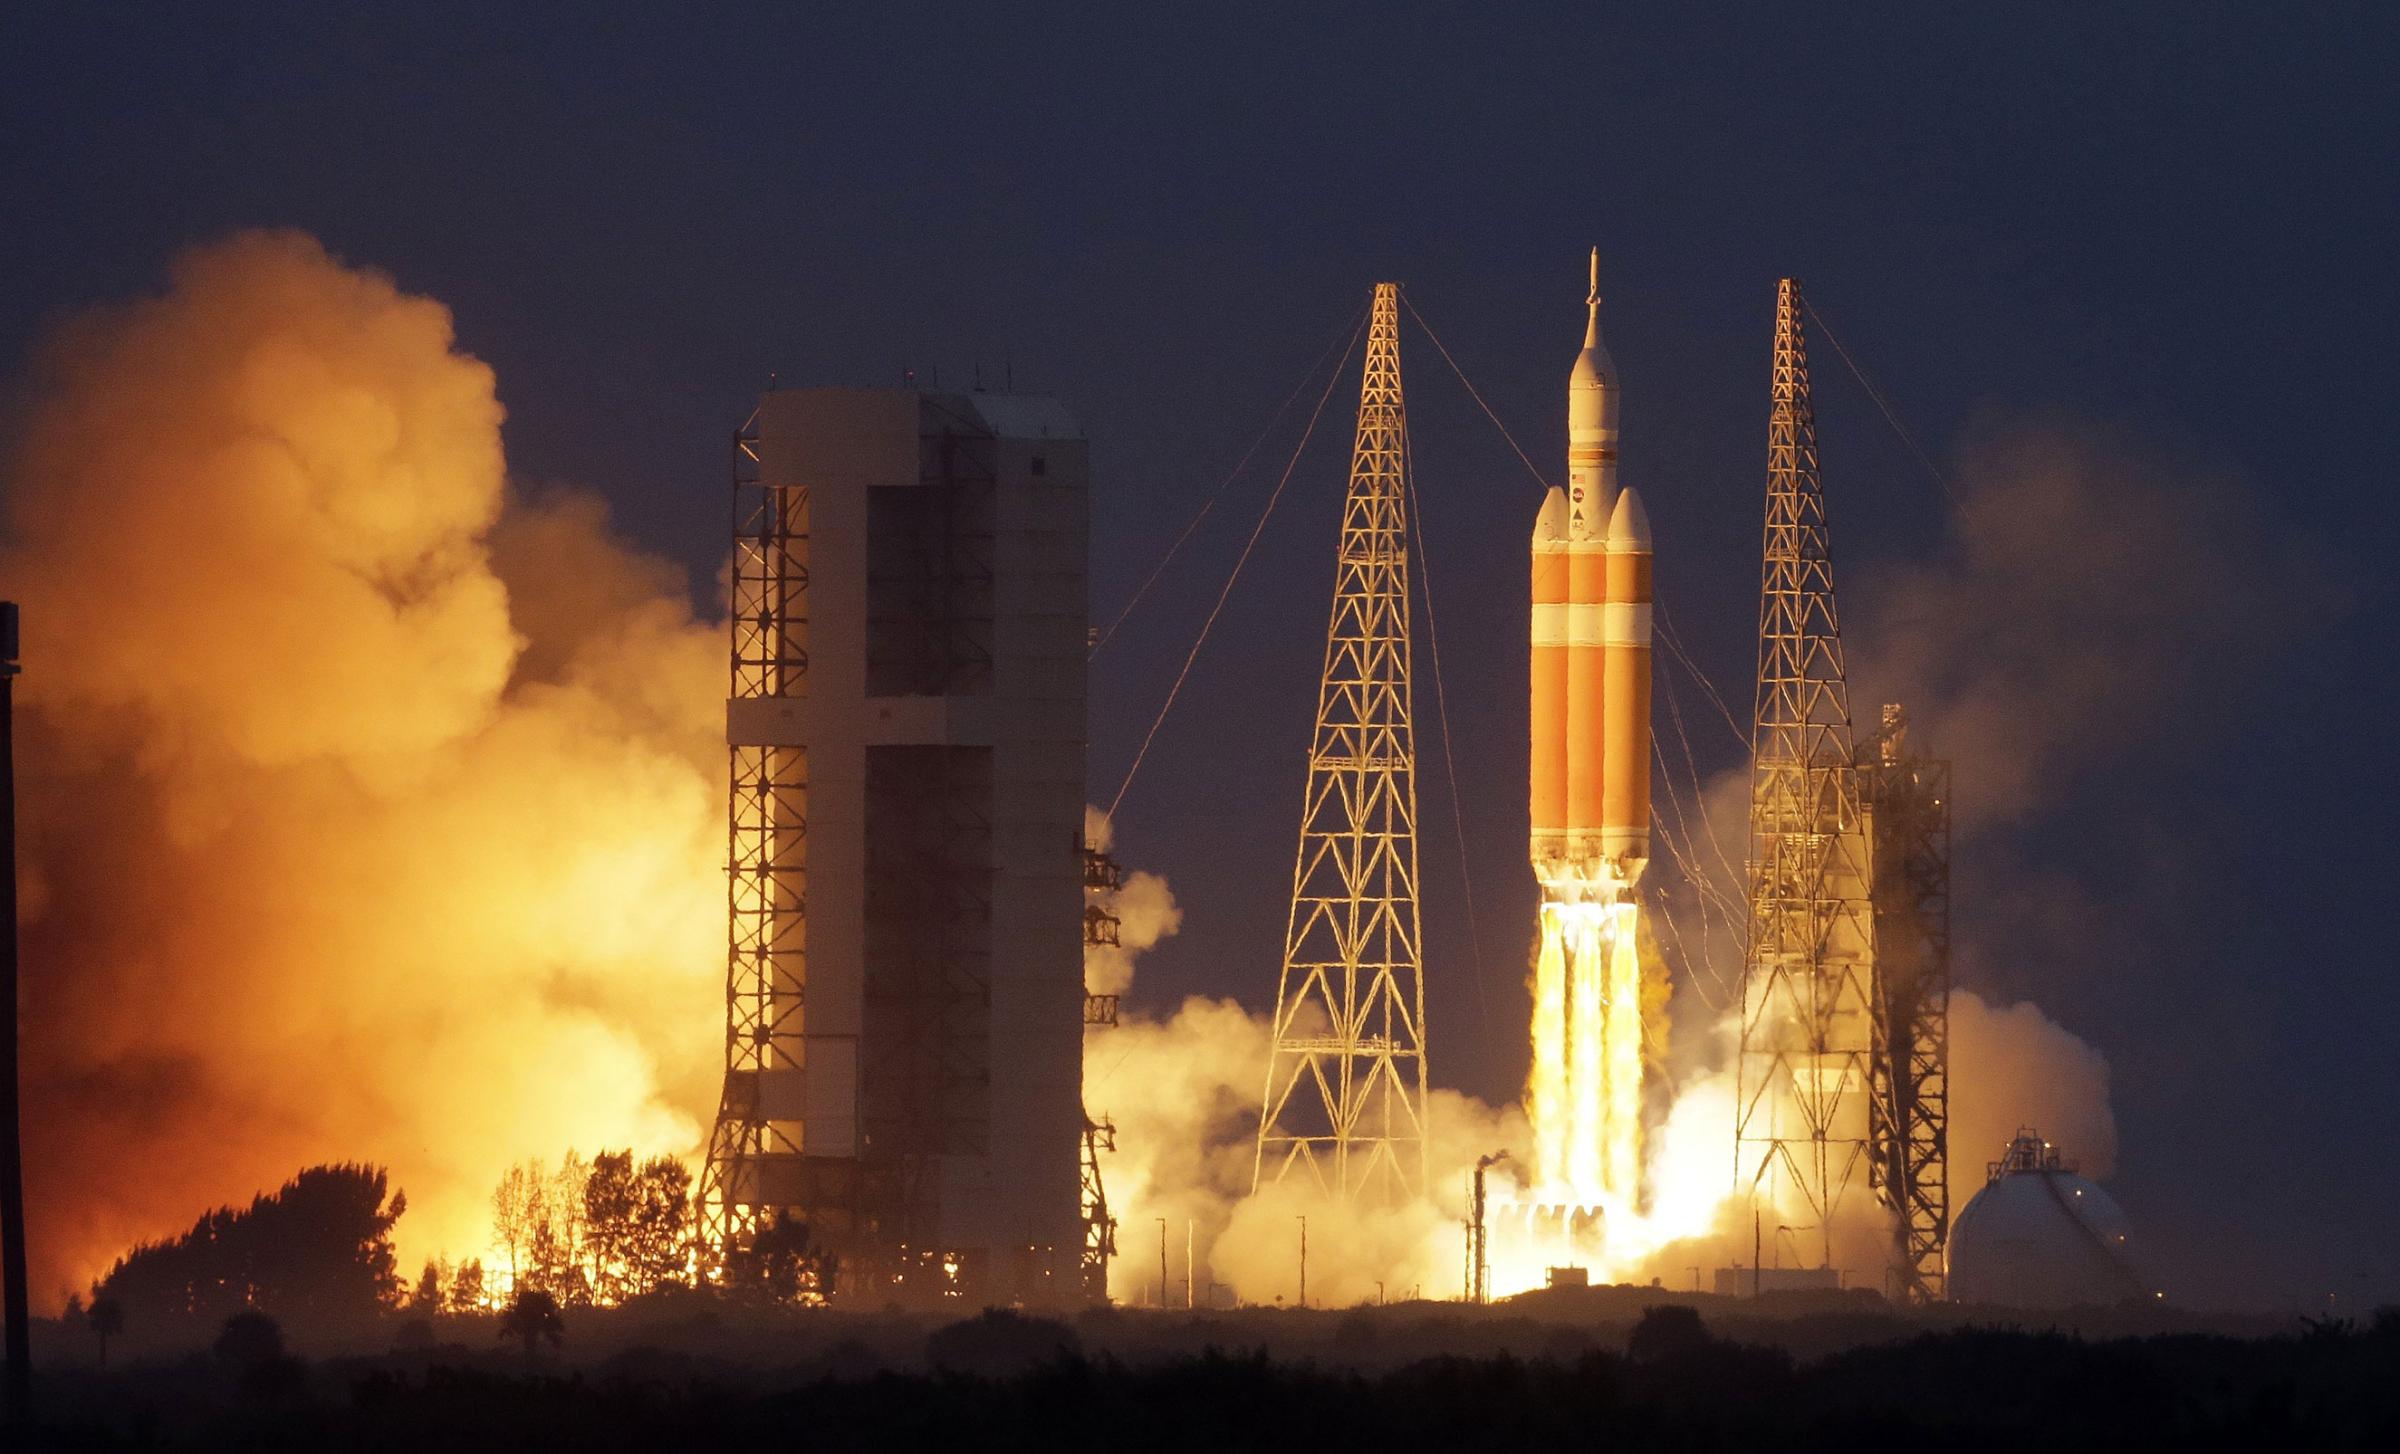 NASA's Orion spacecraft, atop a United Launch Alliance Delta 4-Heavy rocket, lifts off on its first unmanned orbital test flight from the Cape Canaveral Air Force Station on Dec. 5, 2014, in Cape Canaveral, Fla.